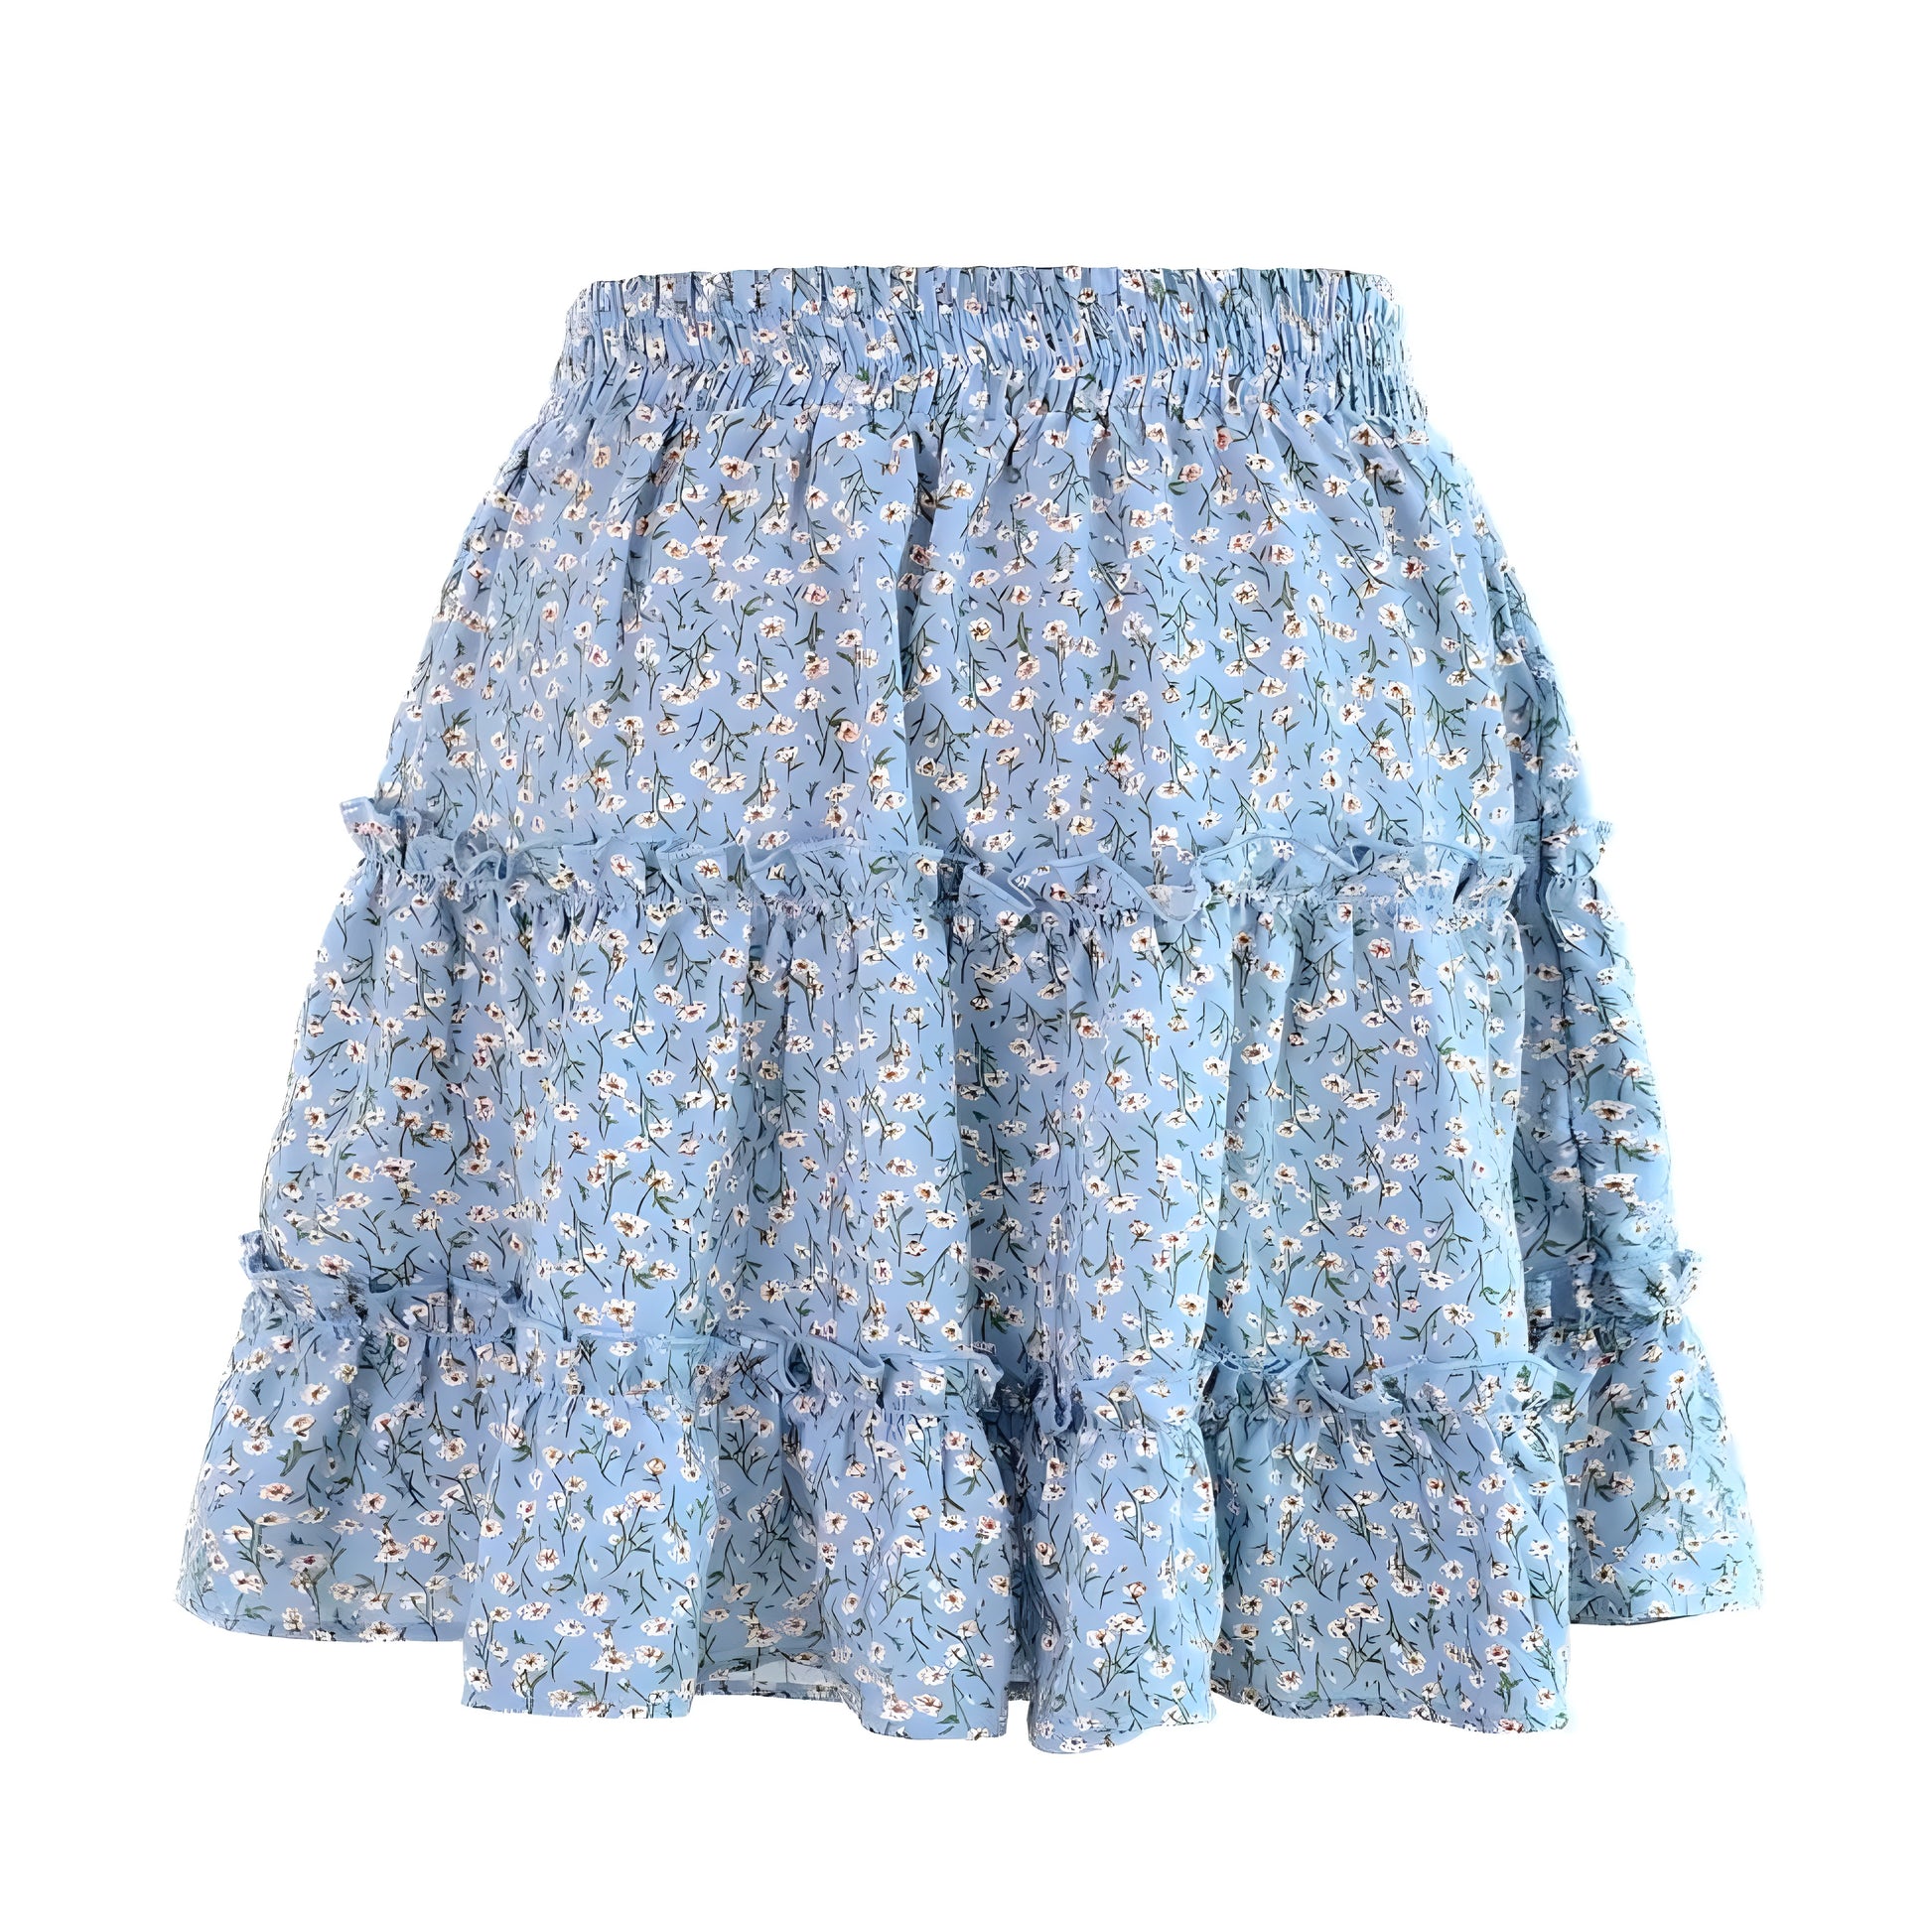 floral-print-light-blue-and-white-daisy-flower-patterned-layered-ruffle-trim-draw-string-tie-fitted-waist-smocked-mid-high-rise-waisted-flowy-boho-tullie-linen-tiered-short-mini-skirt-women-ladies-chic-trendy-spring-2024-summer-elegant-casual-feminine-preppy-style-coastal-granddaughter-beach-wear-zara-altard-state-urban-outfitters-brandy-melville-princess-polly